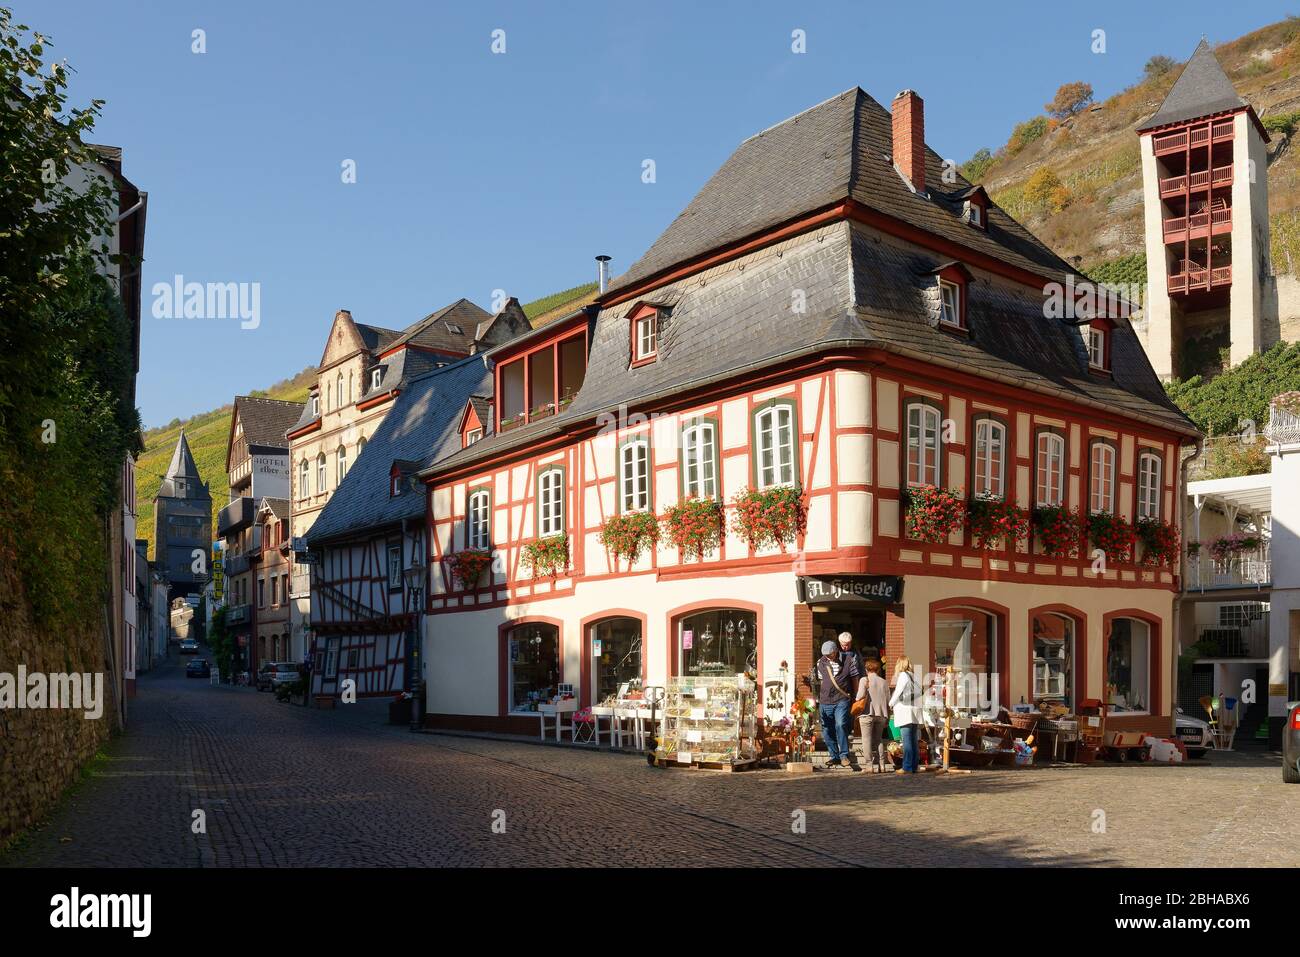 Upper street with half-timbered houses in Bacharach am Rhein, Bacharach, Rhine Valley, UNESCO World Heritage Upper Middle Rhine Valley, Rhineland-Palatinate, Germany Stock Photo